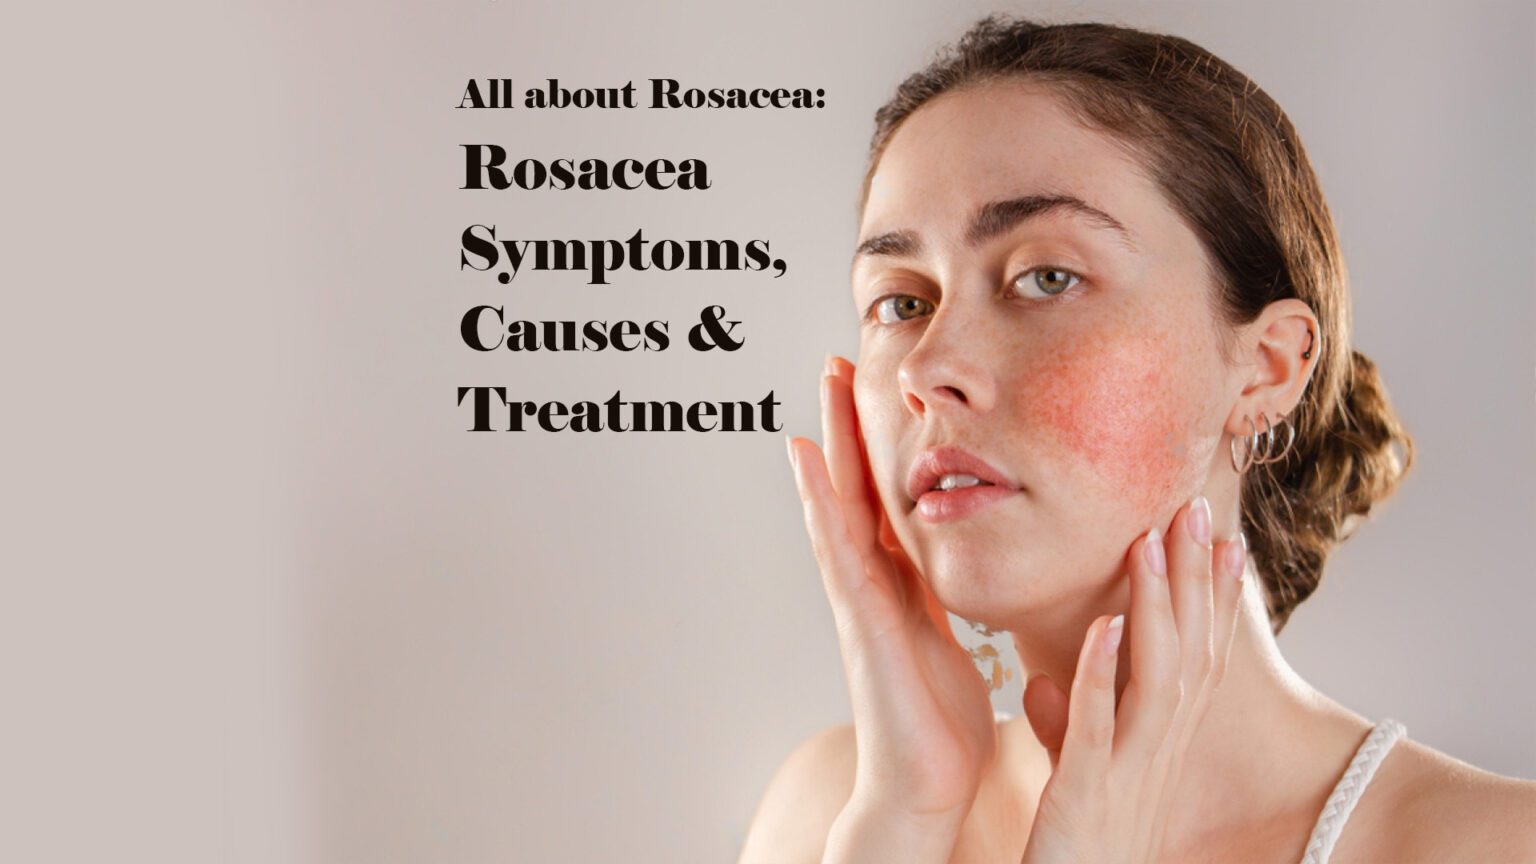 All about Rosacea